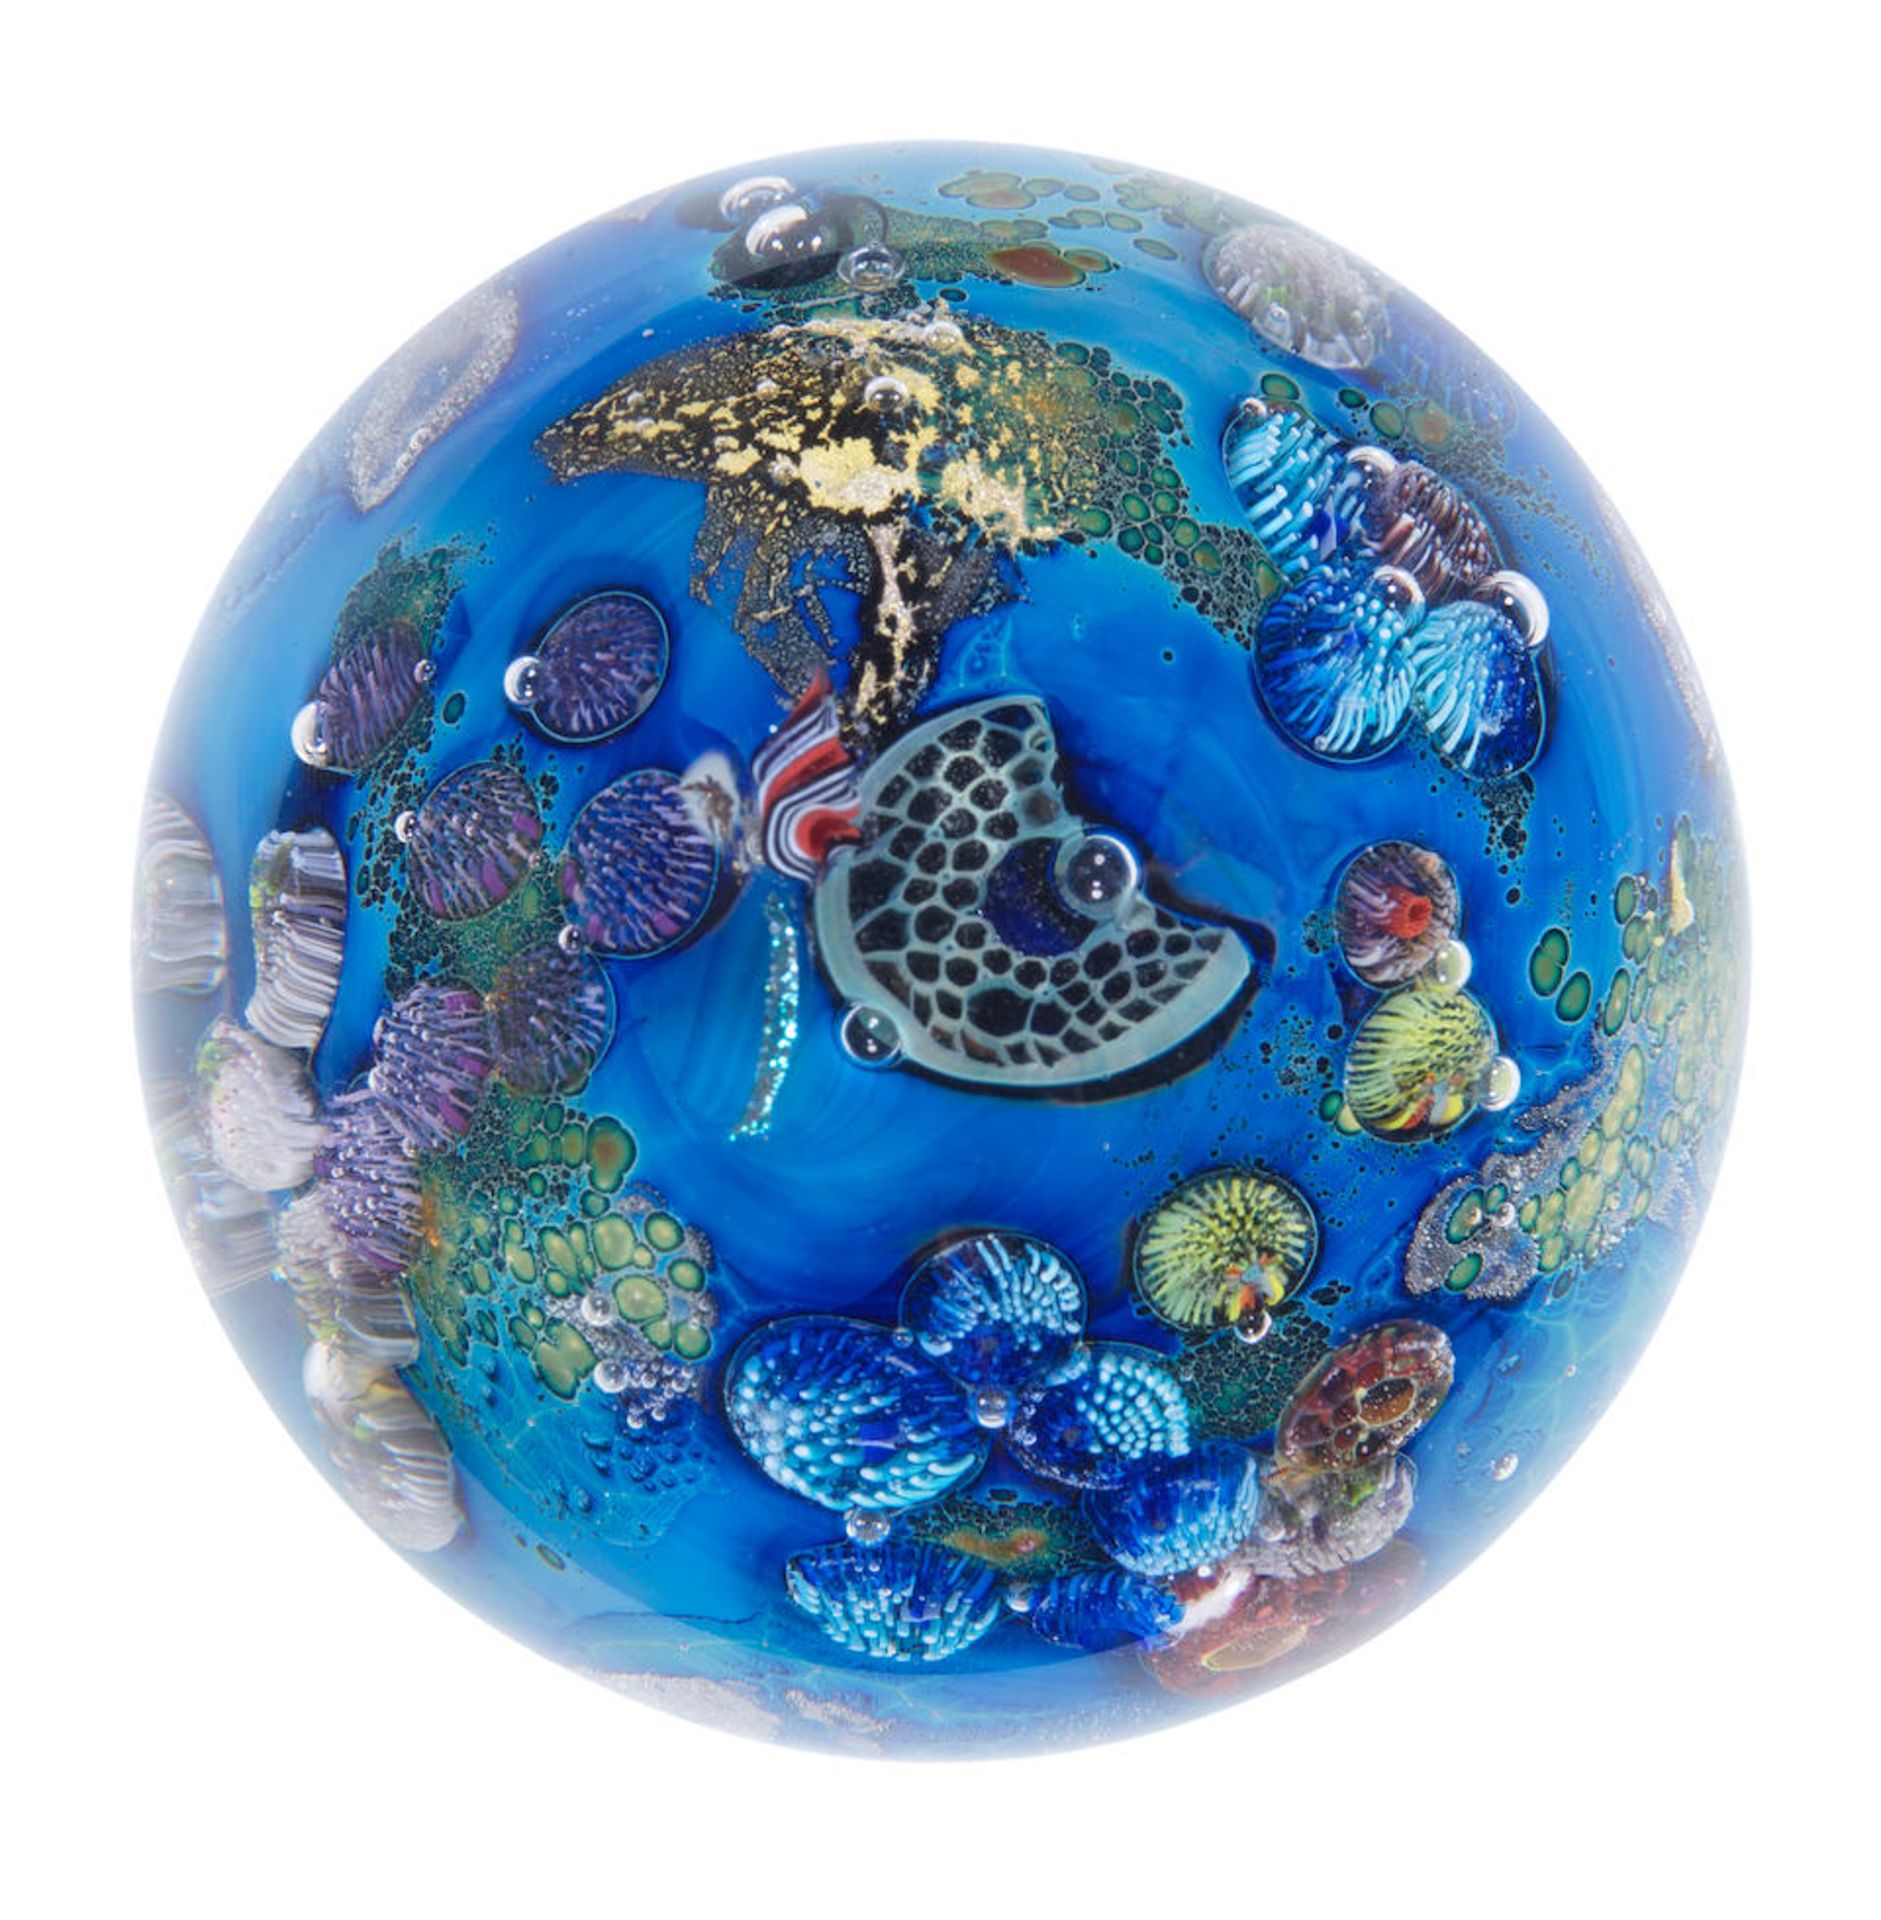 A Josh Simpson 'Megaplanet' magnum paperweight, dated 2007